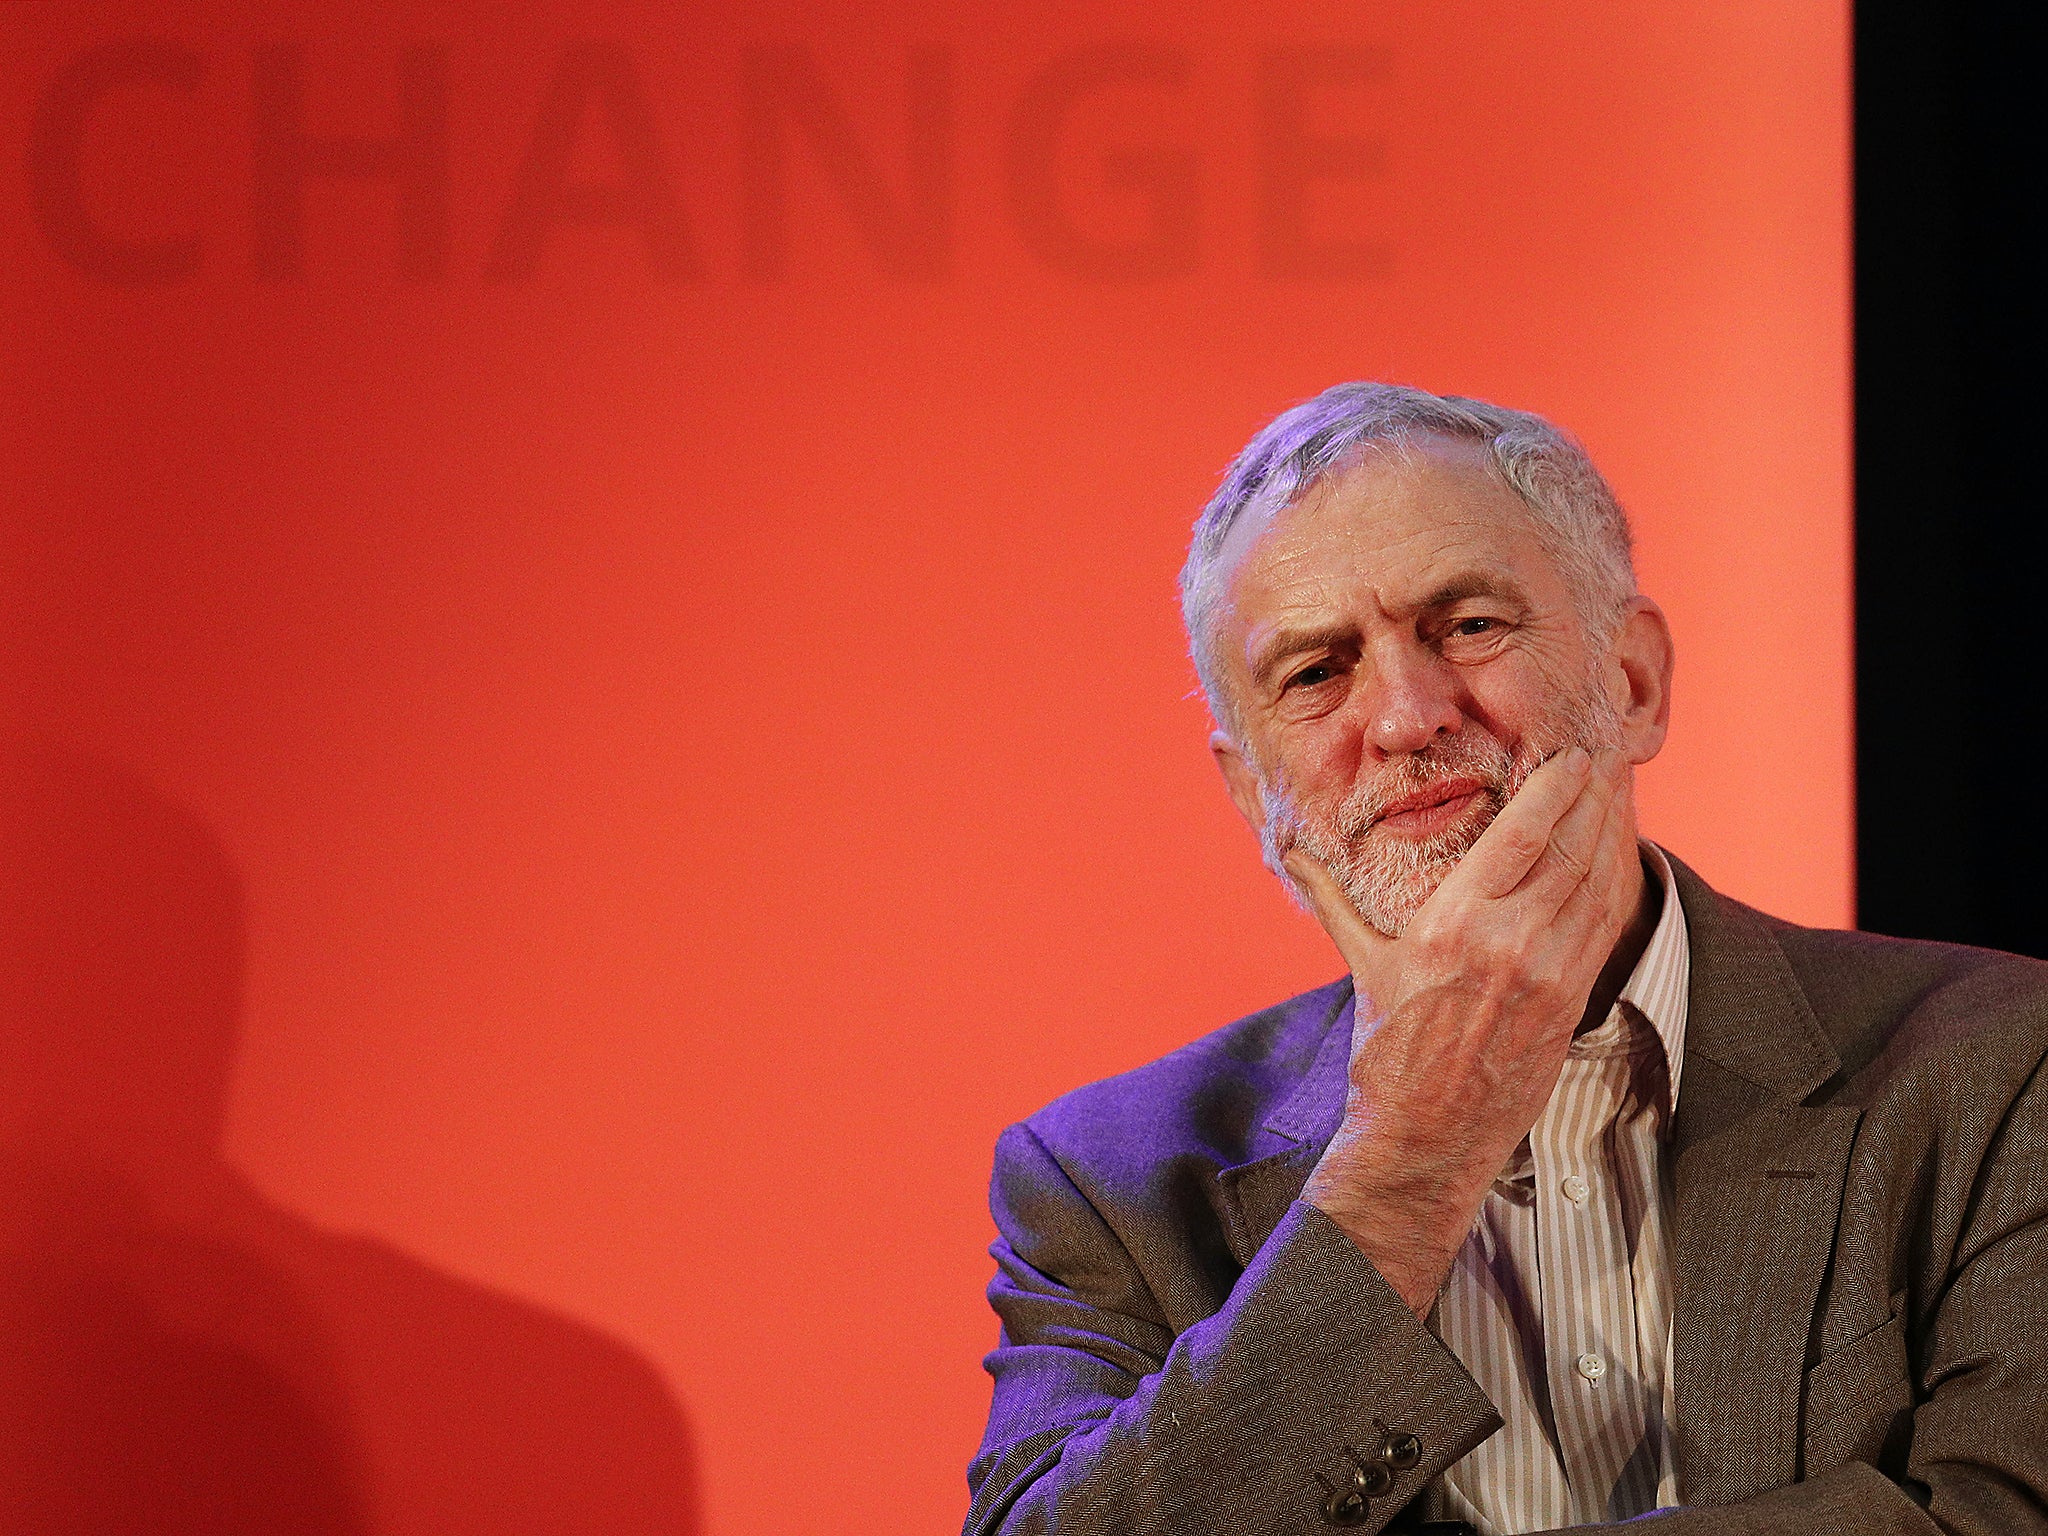 Labour leader Jeremy Corbyn is tapping into the populist sentiment that grasped world politics during 2016